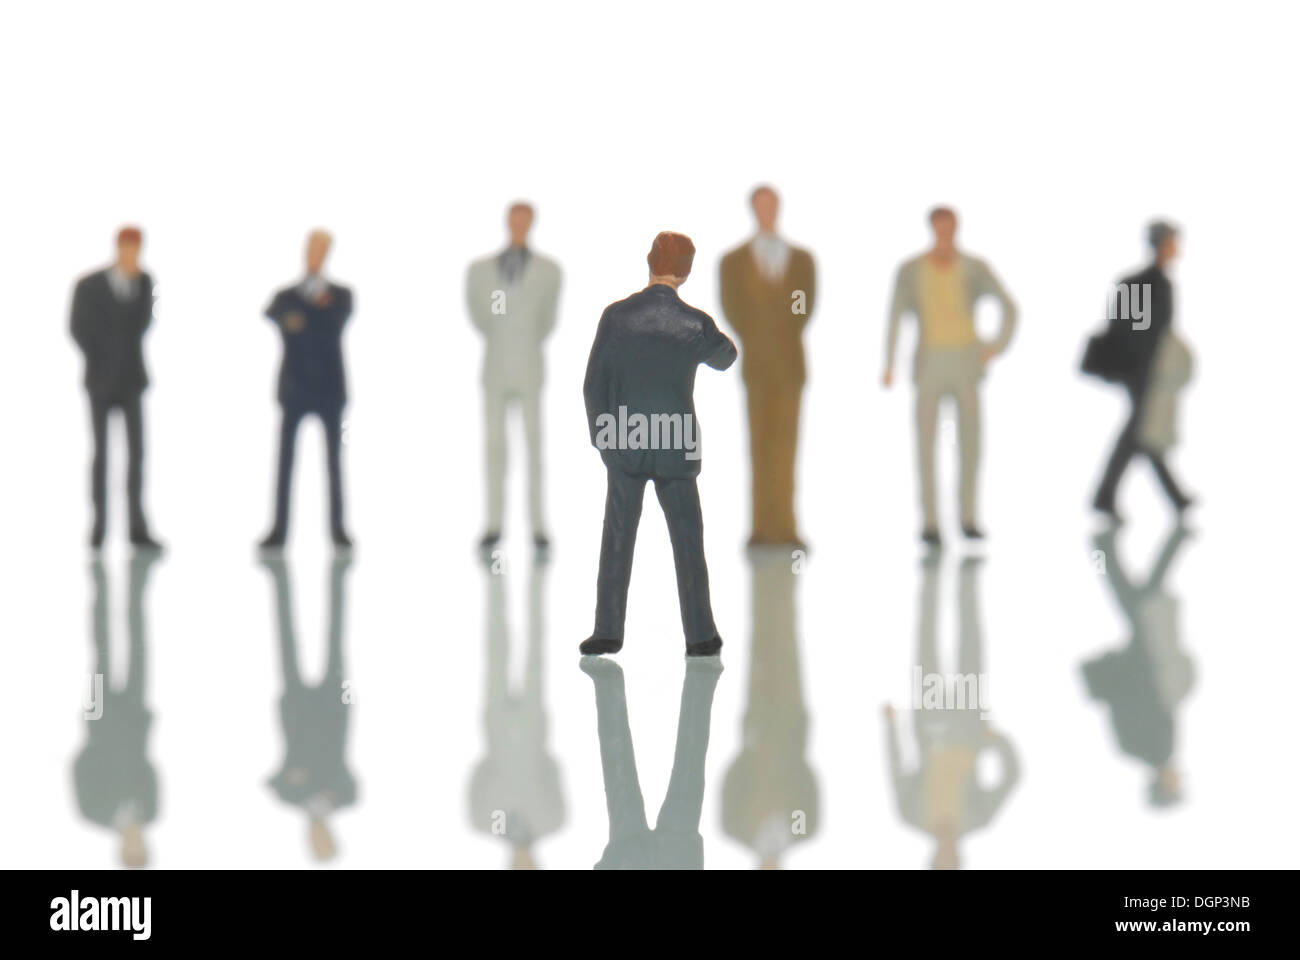 Number of businesmann model figures behind a single model figure, symbolic image for a job interview Stock Photo